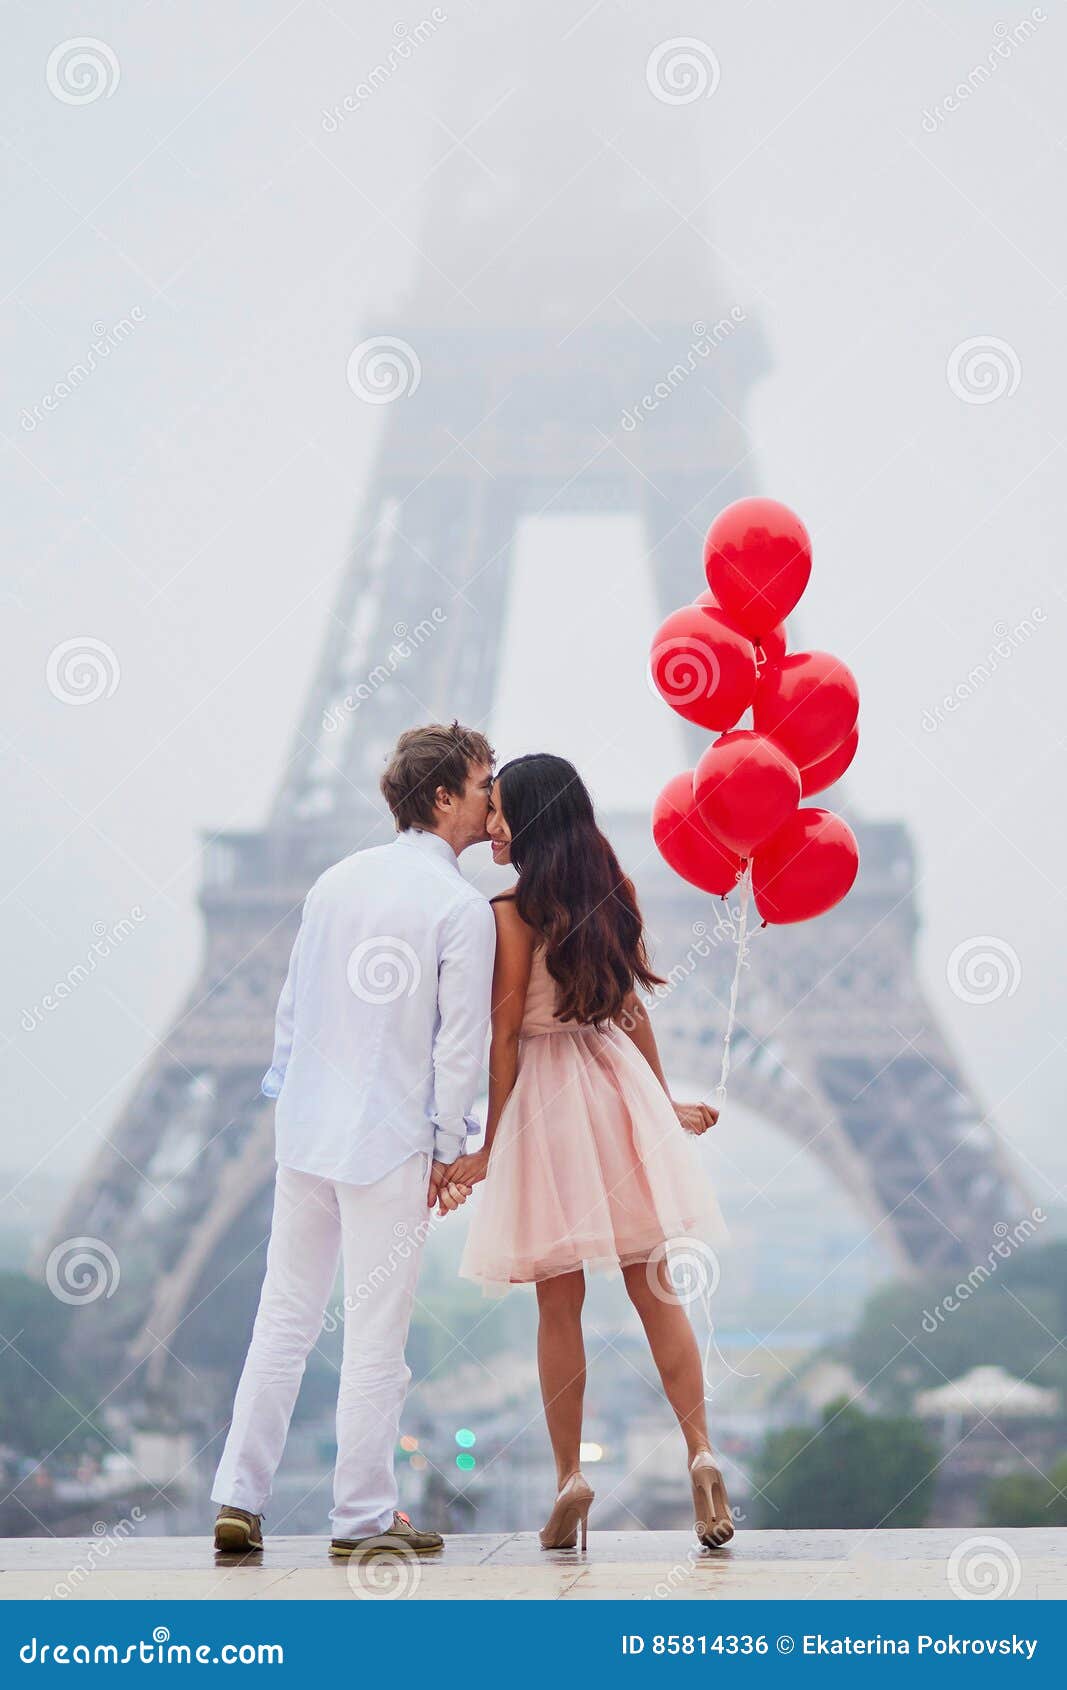 Romantic Couple with Red Balloons Together in Paris Stock Photo ...